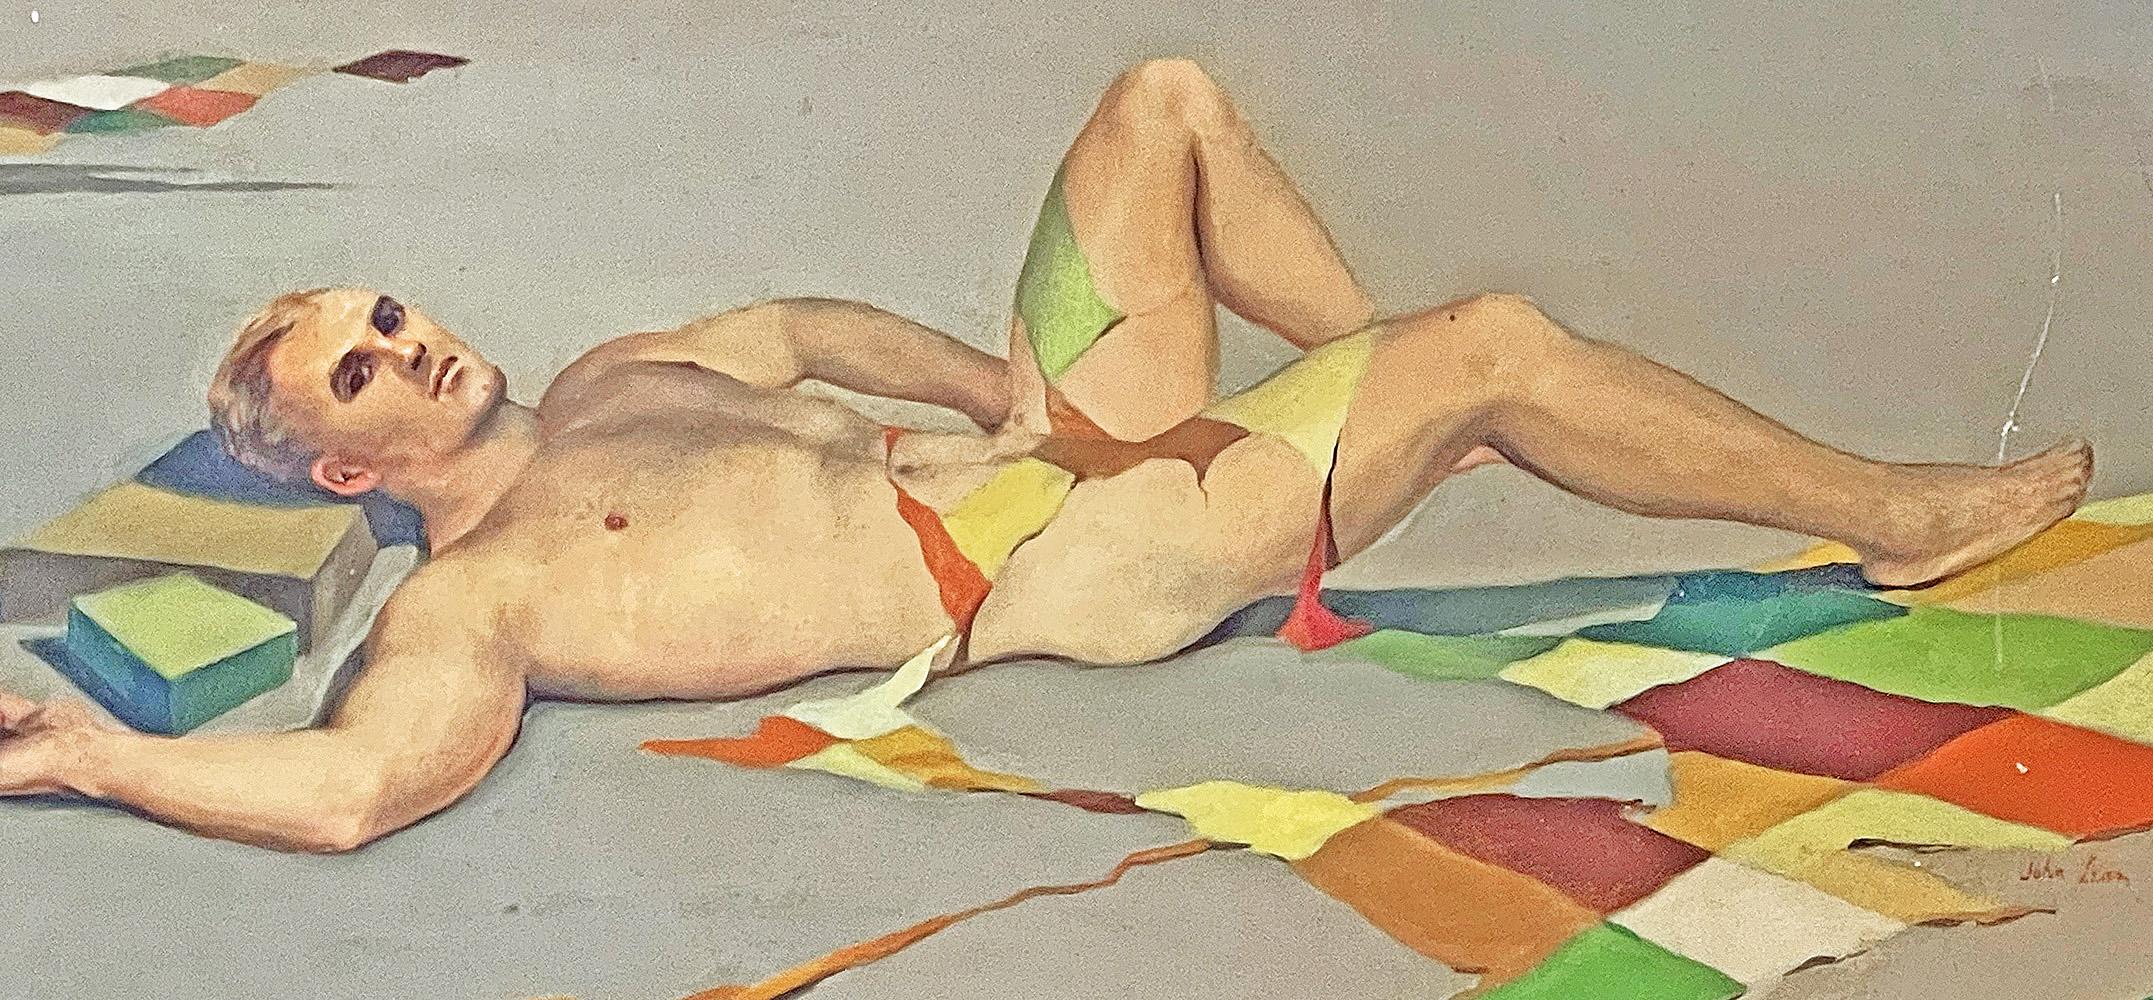 An extraordinary early work of John B. Lear, who is increasingly appreciated for his Mid Century paintings and drawings of male nudes in surreal settings, this 1950s tempera painting depicts a recumbent nude strategically draped with bits of